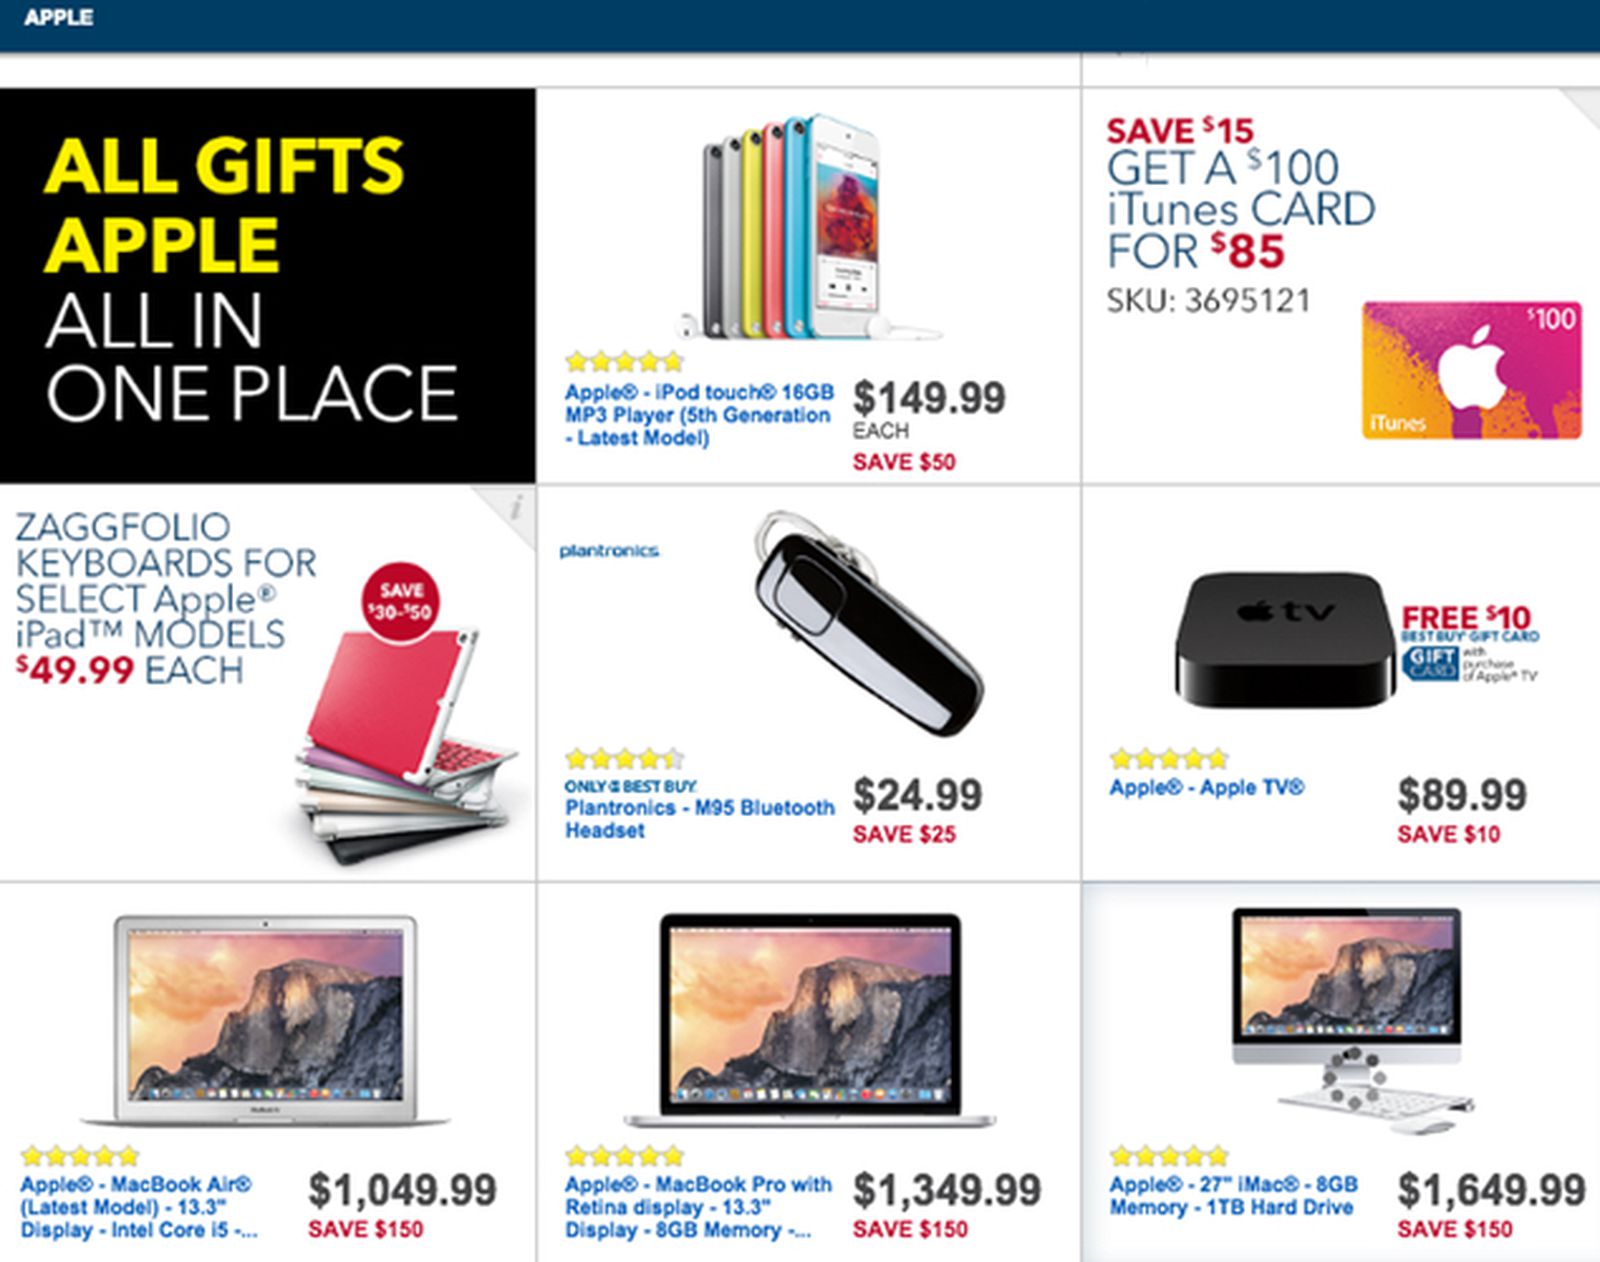 Best Buy launches pre-Black Friday sale with discounts on iPods